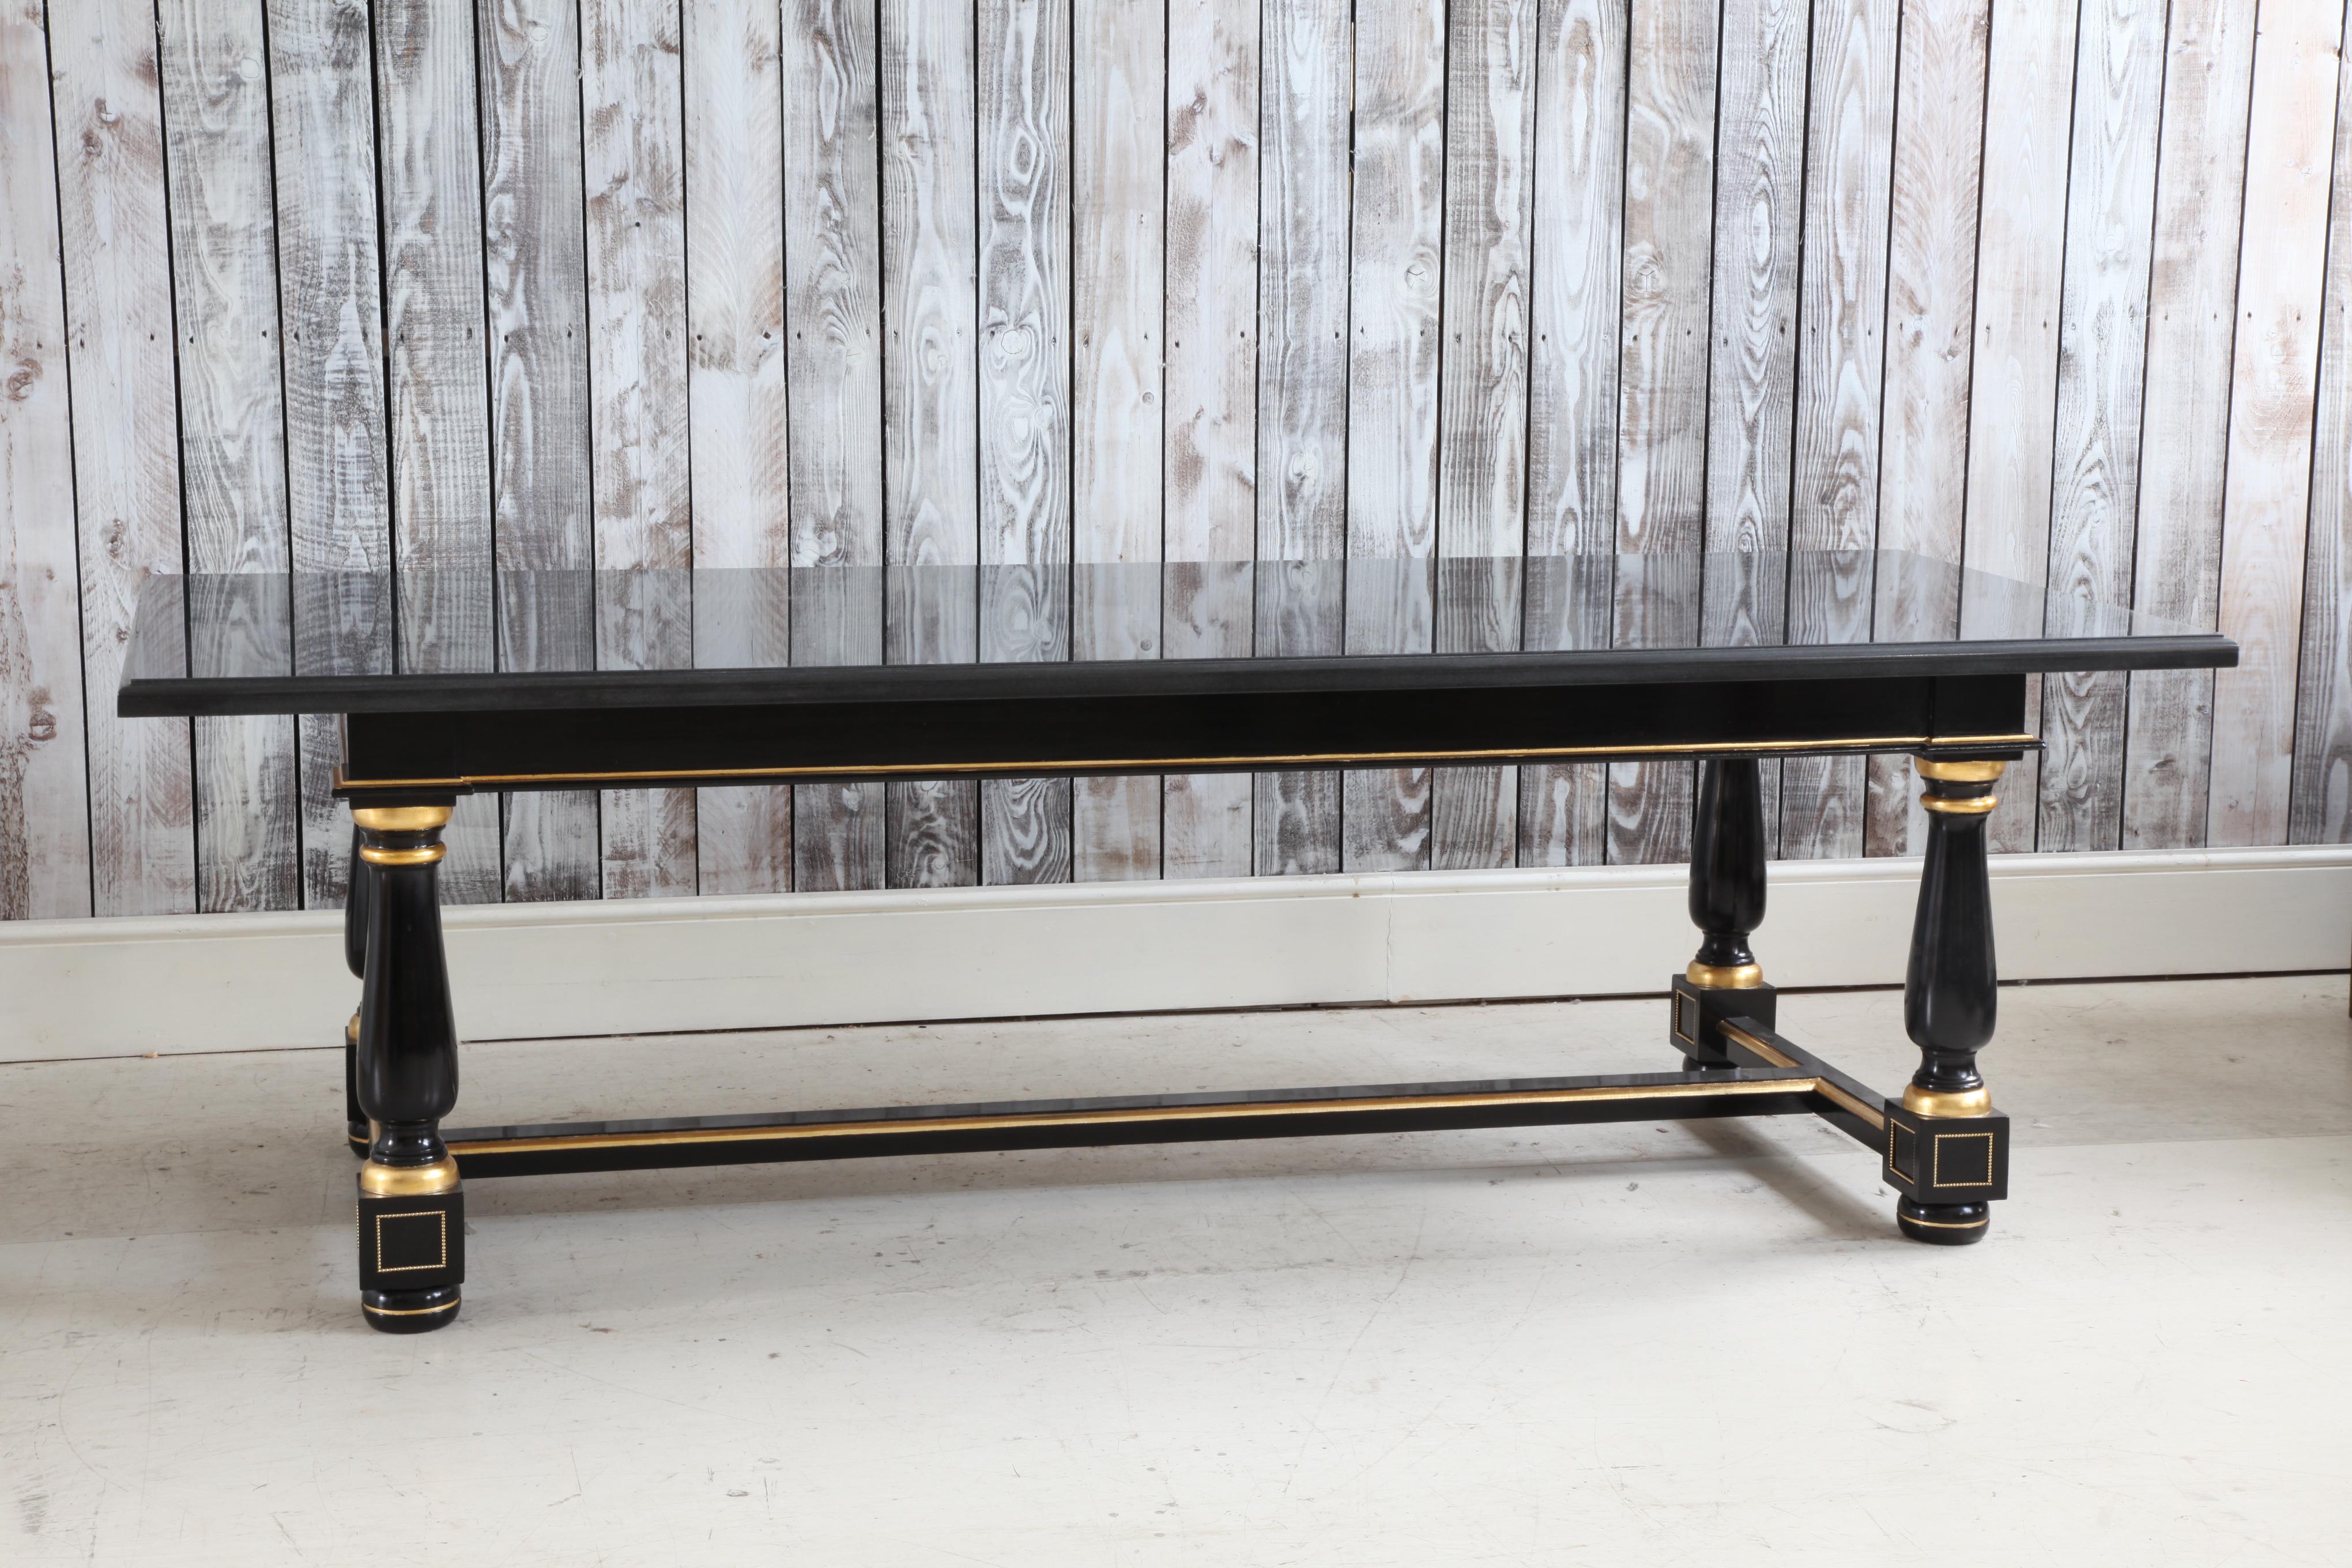 Wooden dining table finished in a black Lacquer with gold highlights and ormolu pearls on the feet.
The top is a 30mm Nero Assoluto polished granite.
 